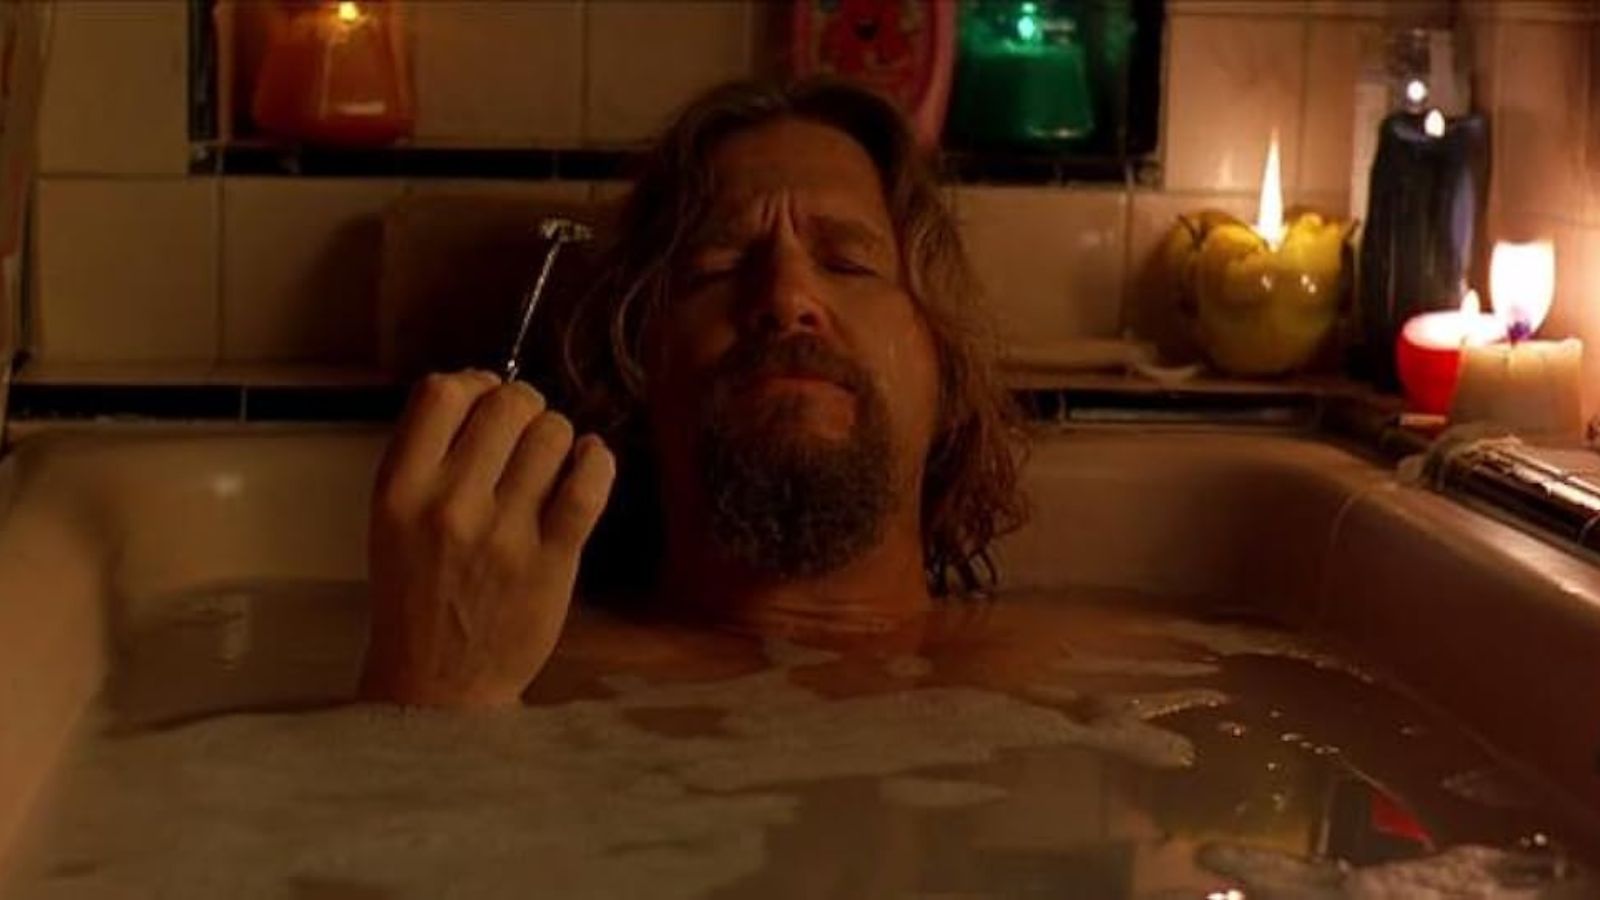 <p class="p2">The Big Lebowski is a 1998 crime comedy film directed by Joel and Ethan Coen. The film has a cult following and is known for its quirky characters and surreal humor. The most iconic quote from the movie is “The Dude abides.” This line has become synonymous with the character played by Jeff Bridges and is often used as a catchphrase among fans of the film.</p>